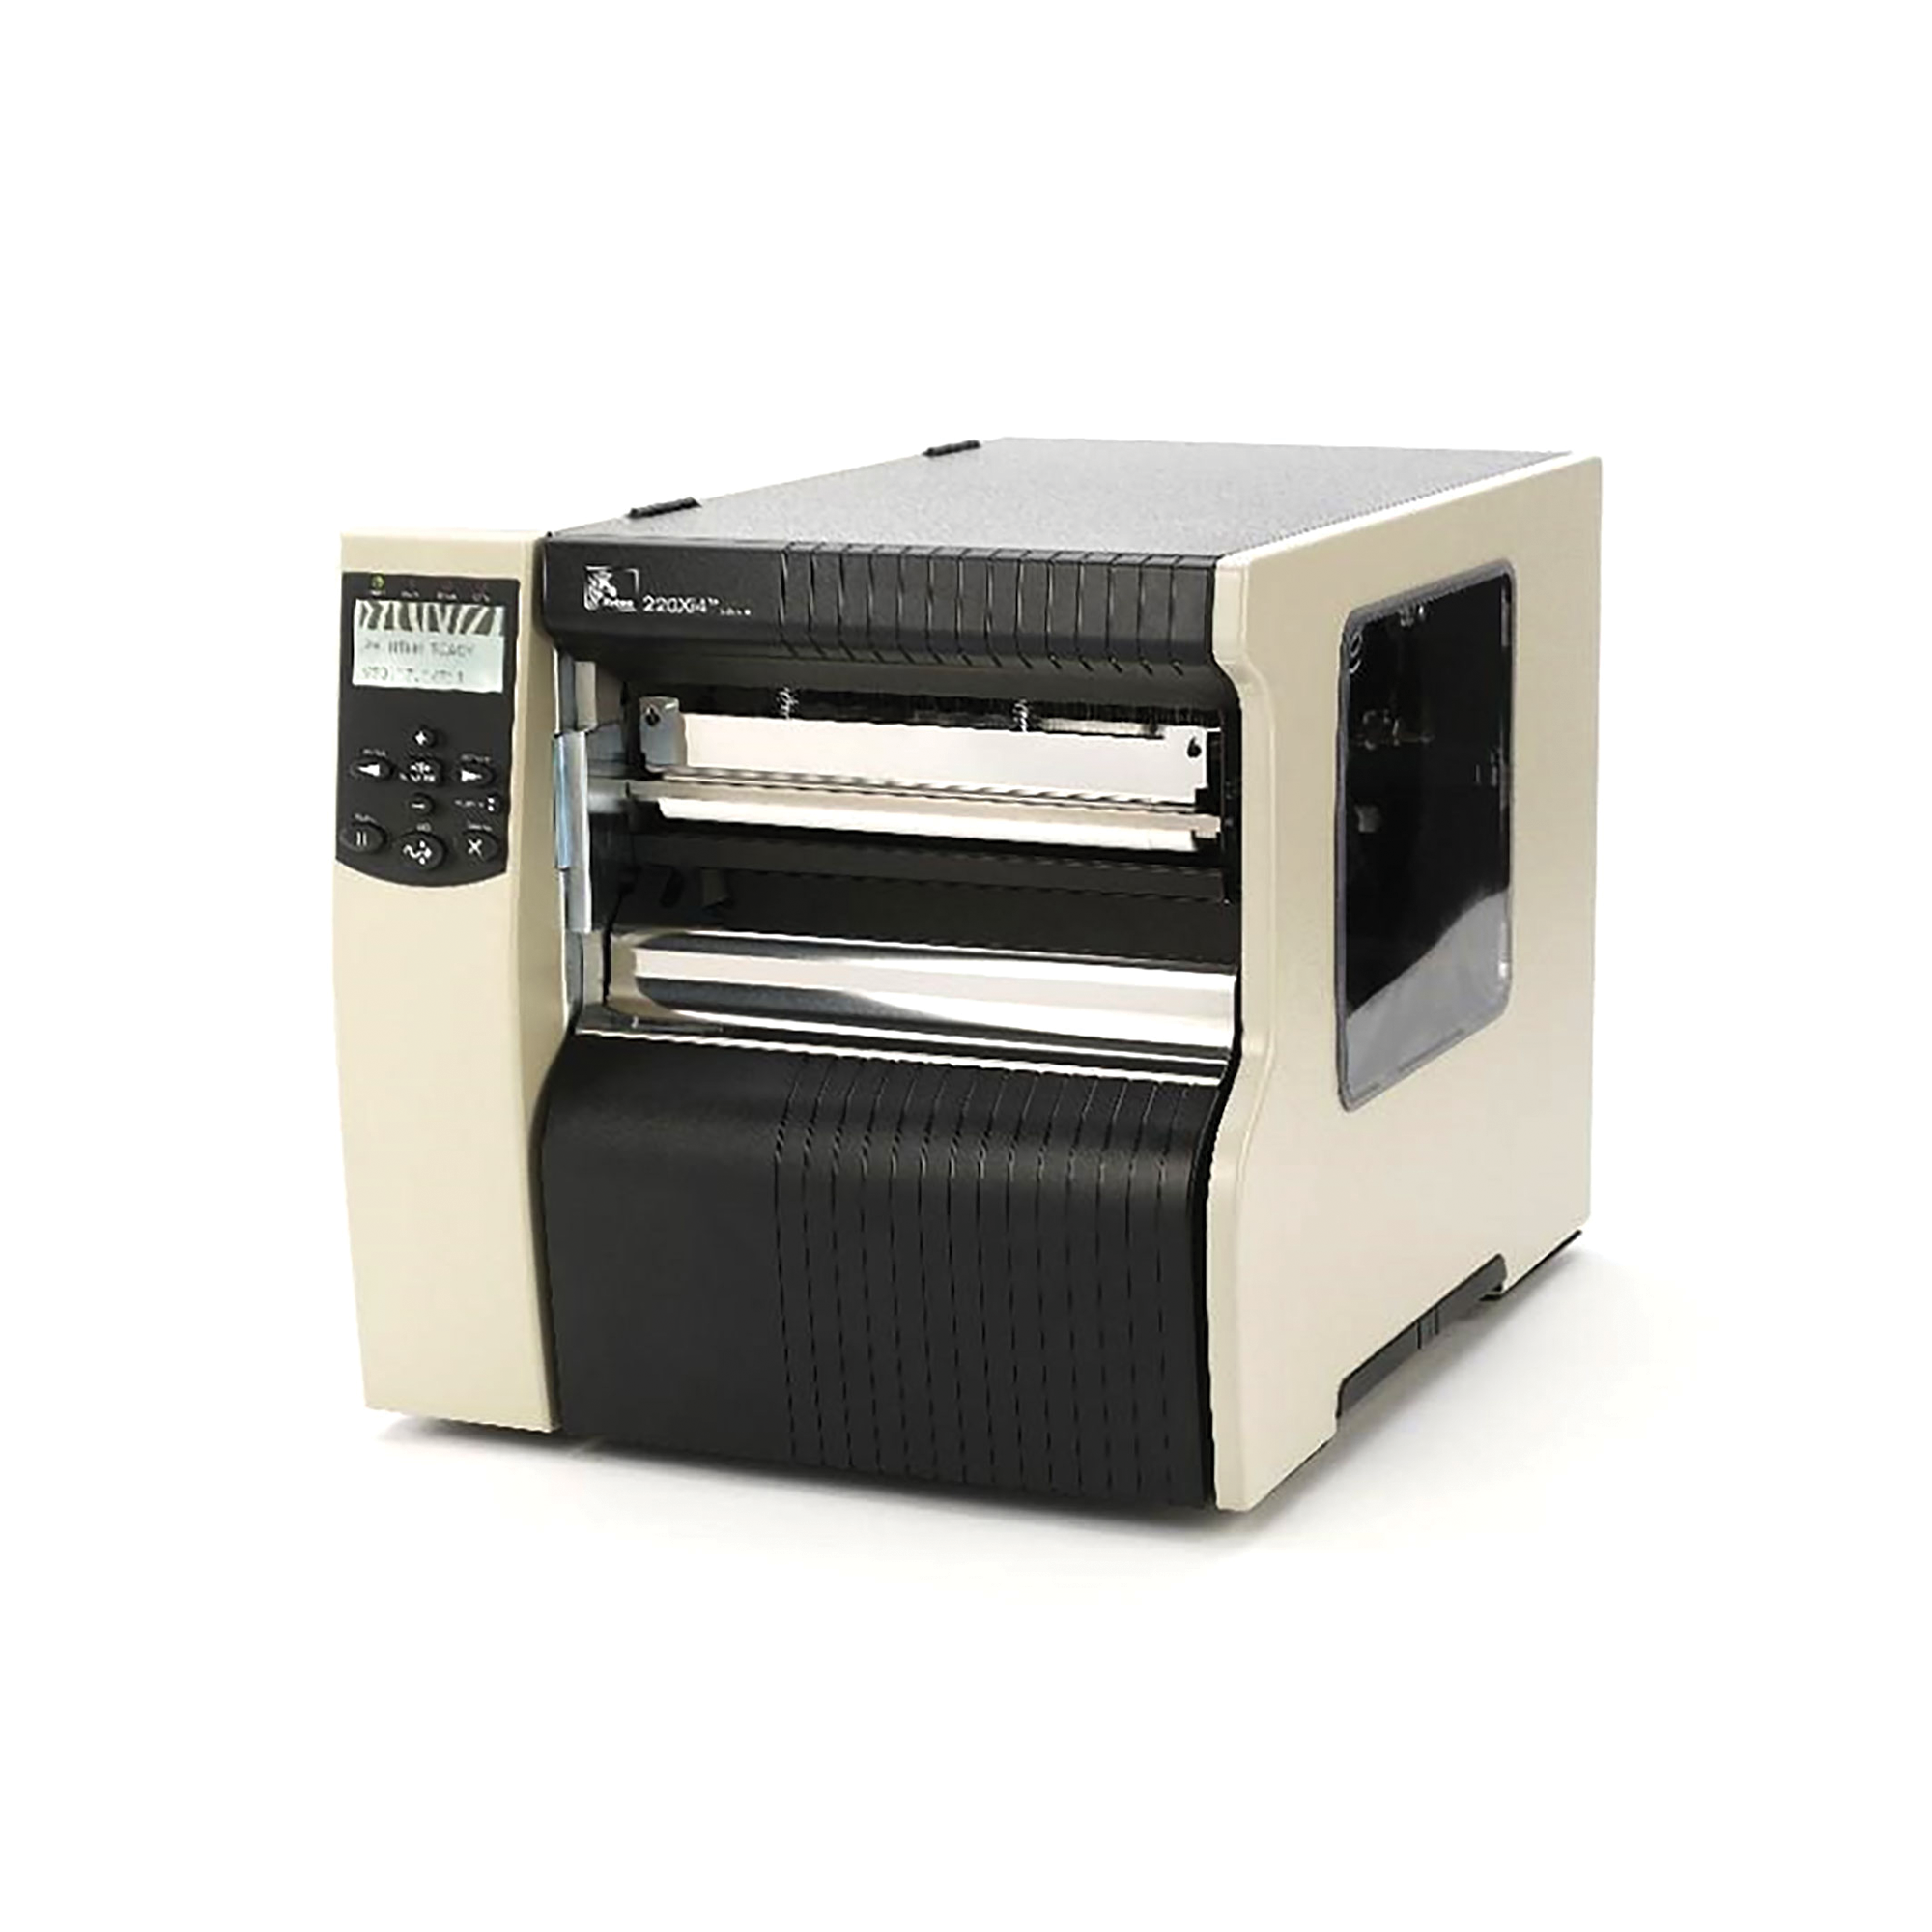 Zebra 220Xi4 Thermal Transfer Printer - 300dpi, US Cord, Serial, Parallel, USB, Int 10/100, Cutter with Catch Tray - MPN: 223-801-00100